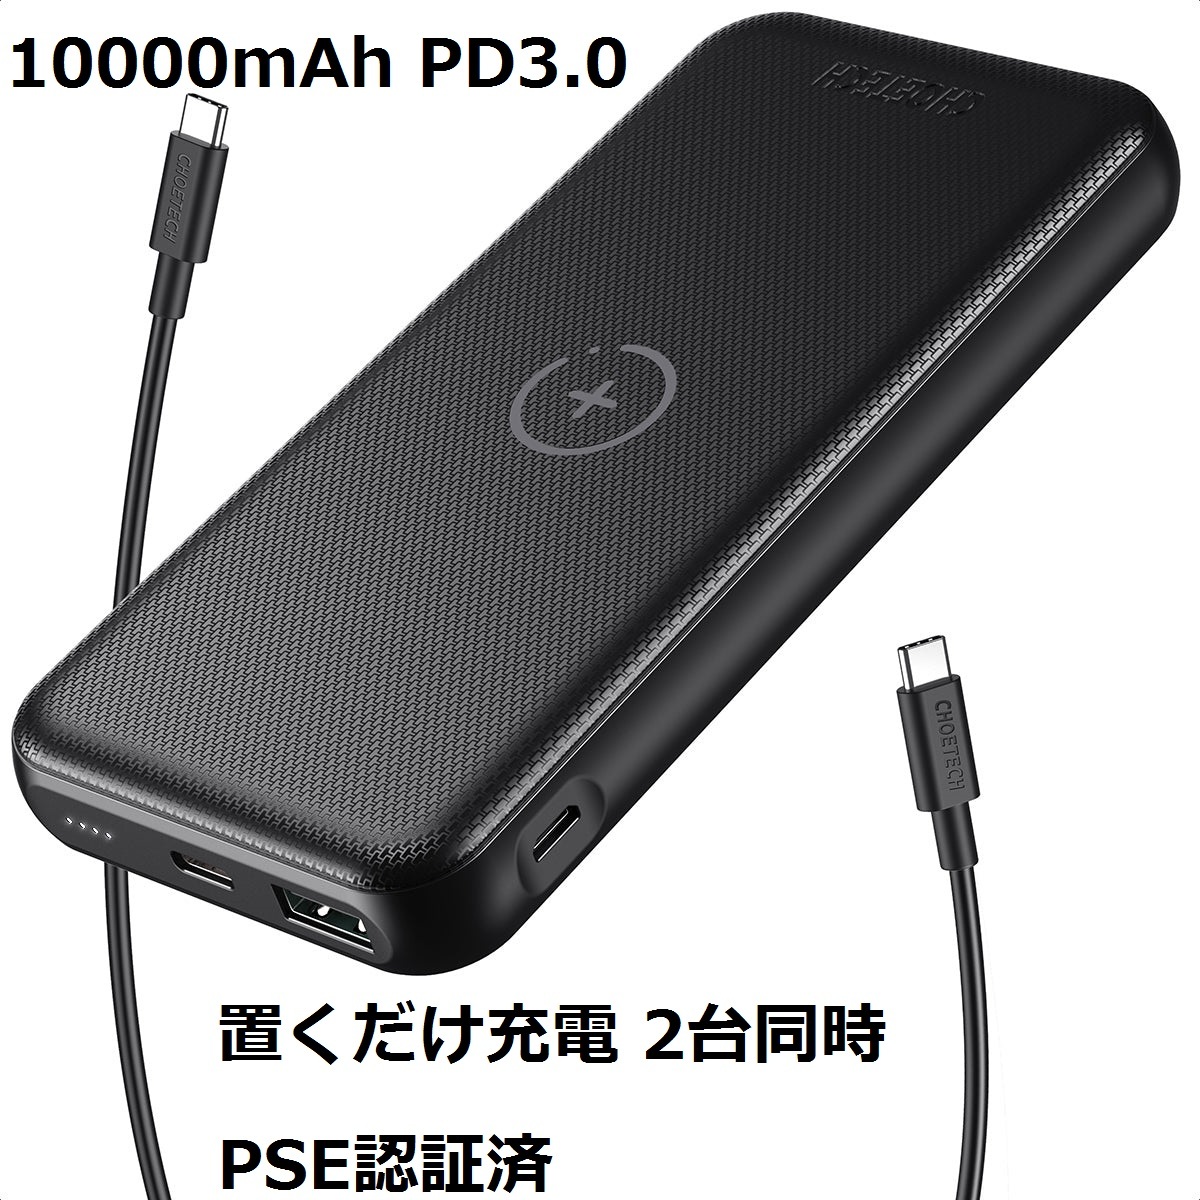  new goods * wireless mobile battery sudden speed charge 10000mAh PD3.0 QC 2 pcs same time PSE certification settled thin type put only charge iPhone Android correspondence B650